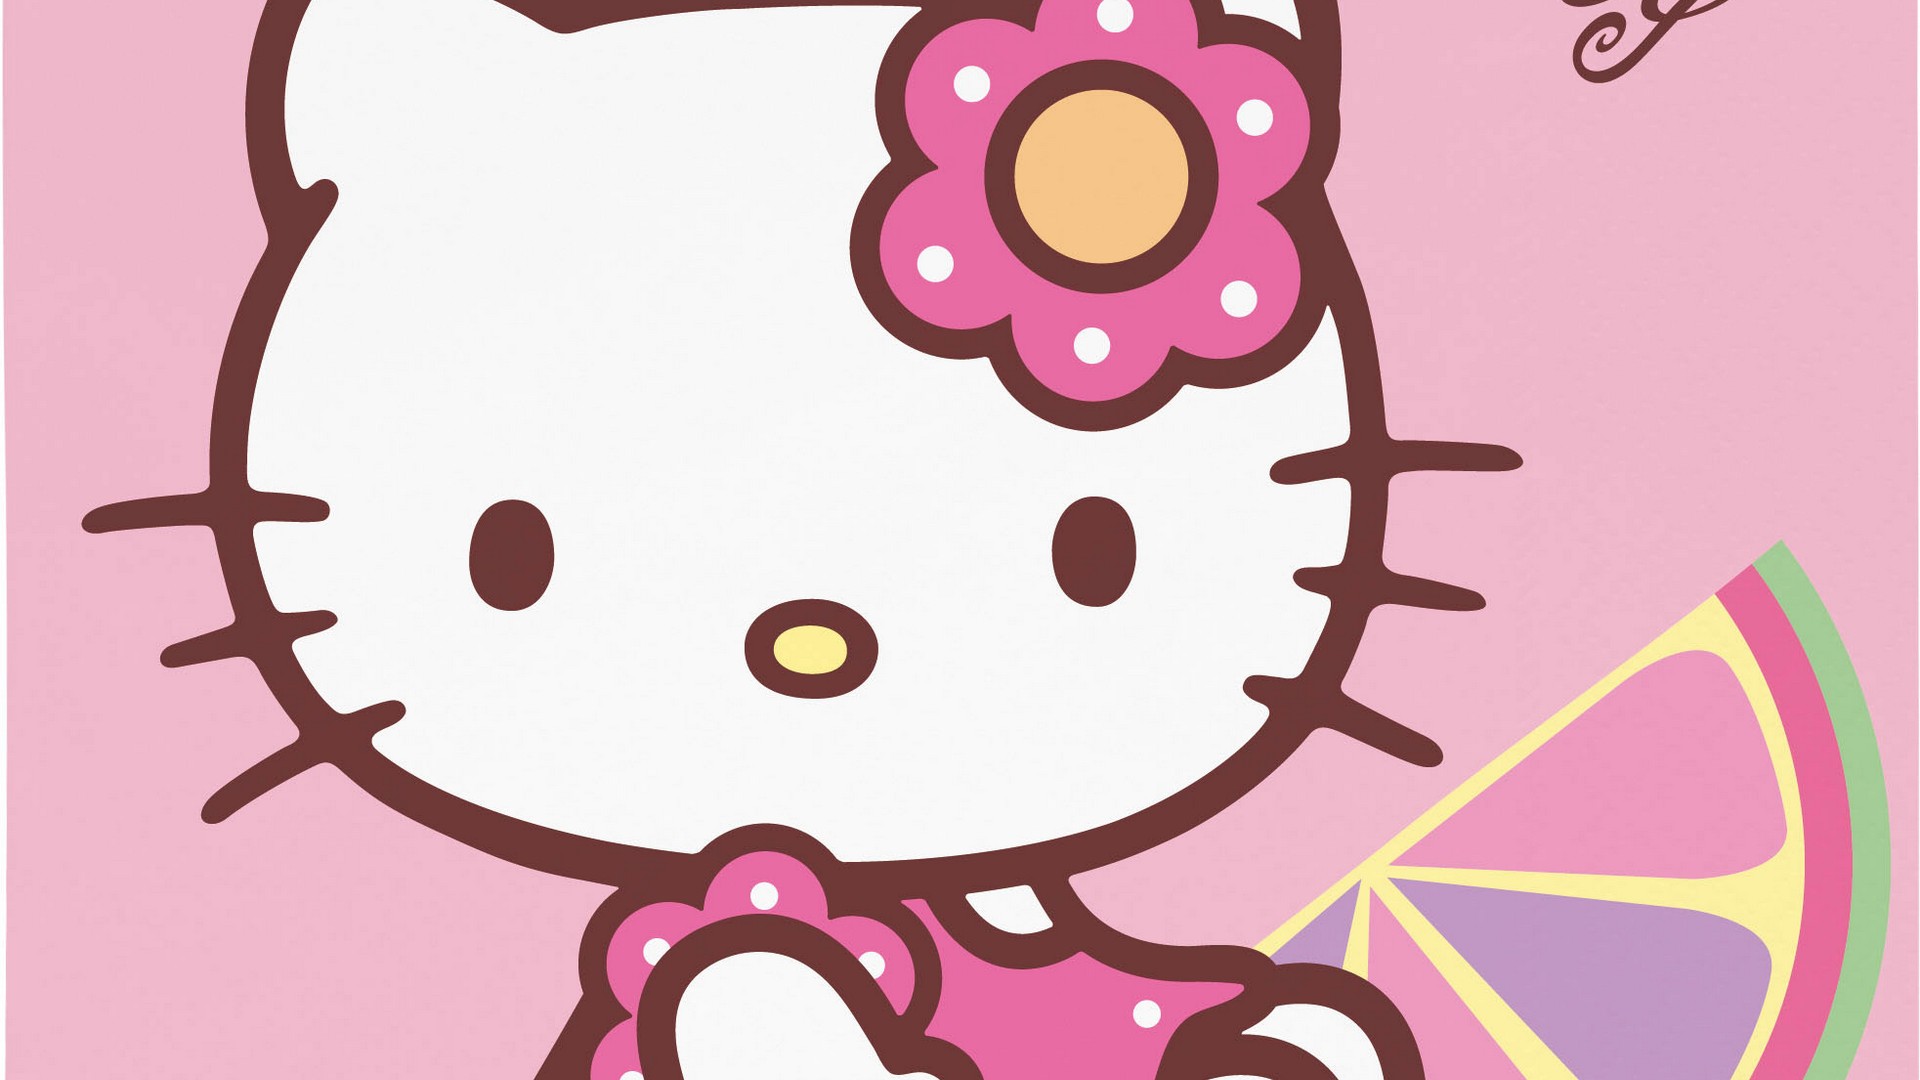 Hello Kitty Images Wallpaper HD with image resolution 1920x1080 pixel. You can make this wallpaper for your Desktop Computer Backgrounds, Mac Wallpapers, Android Lock screen or iPhone Screensavers